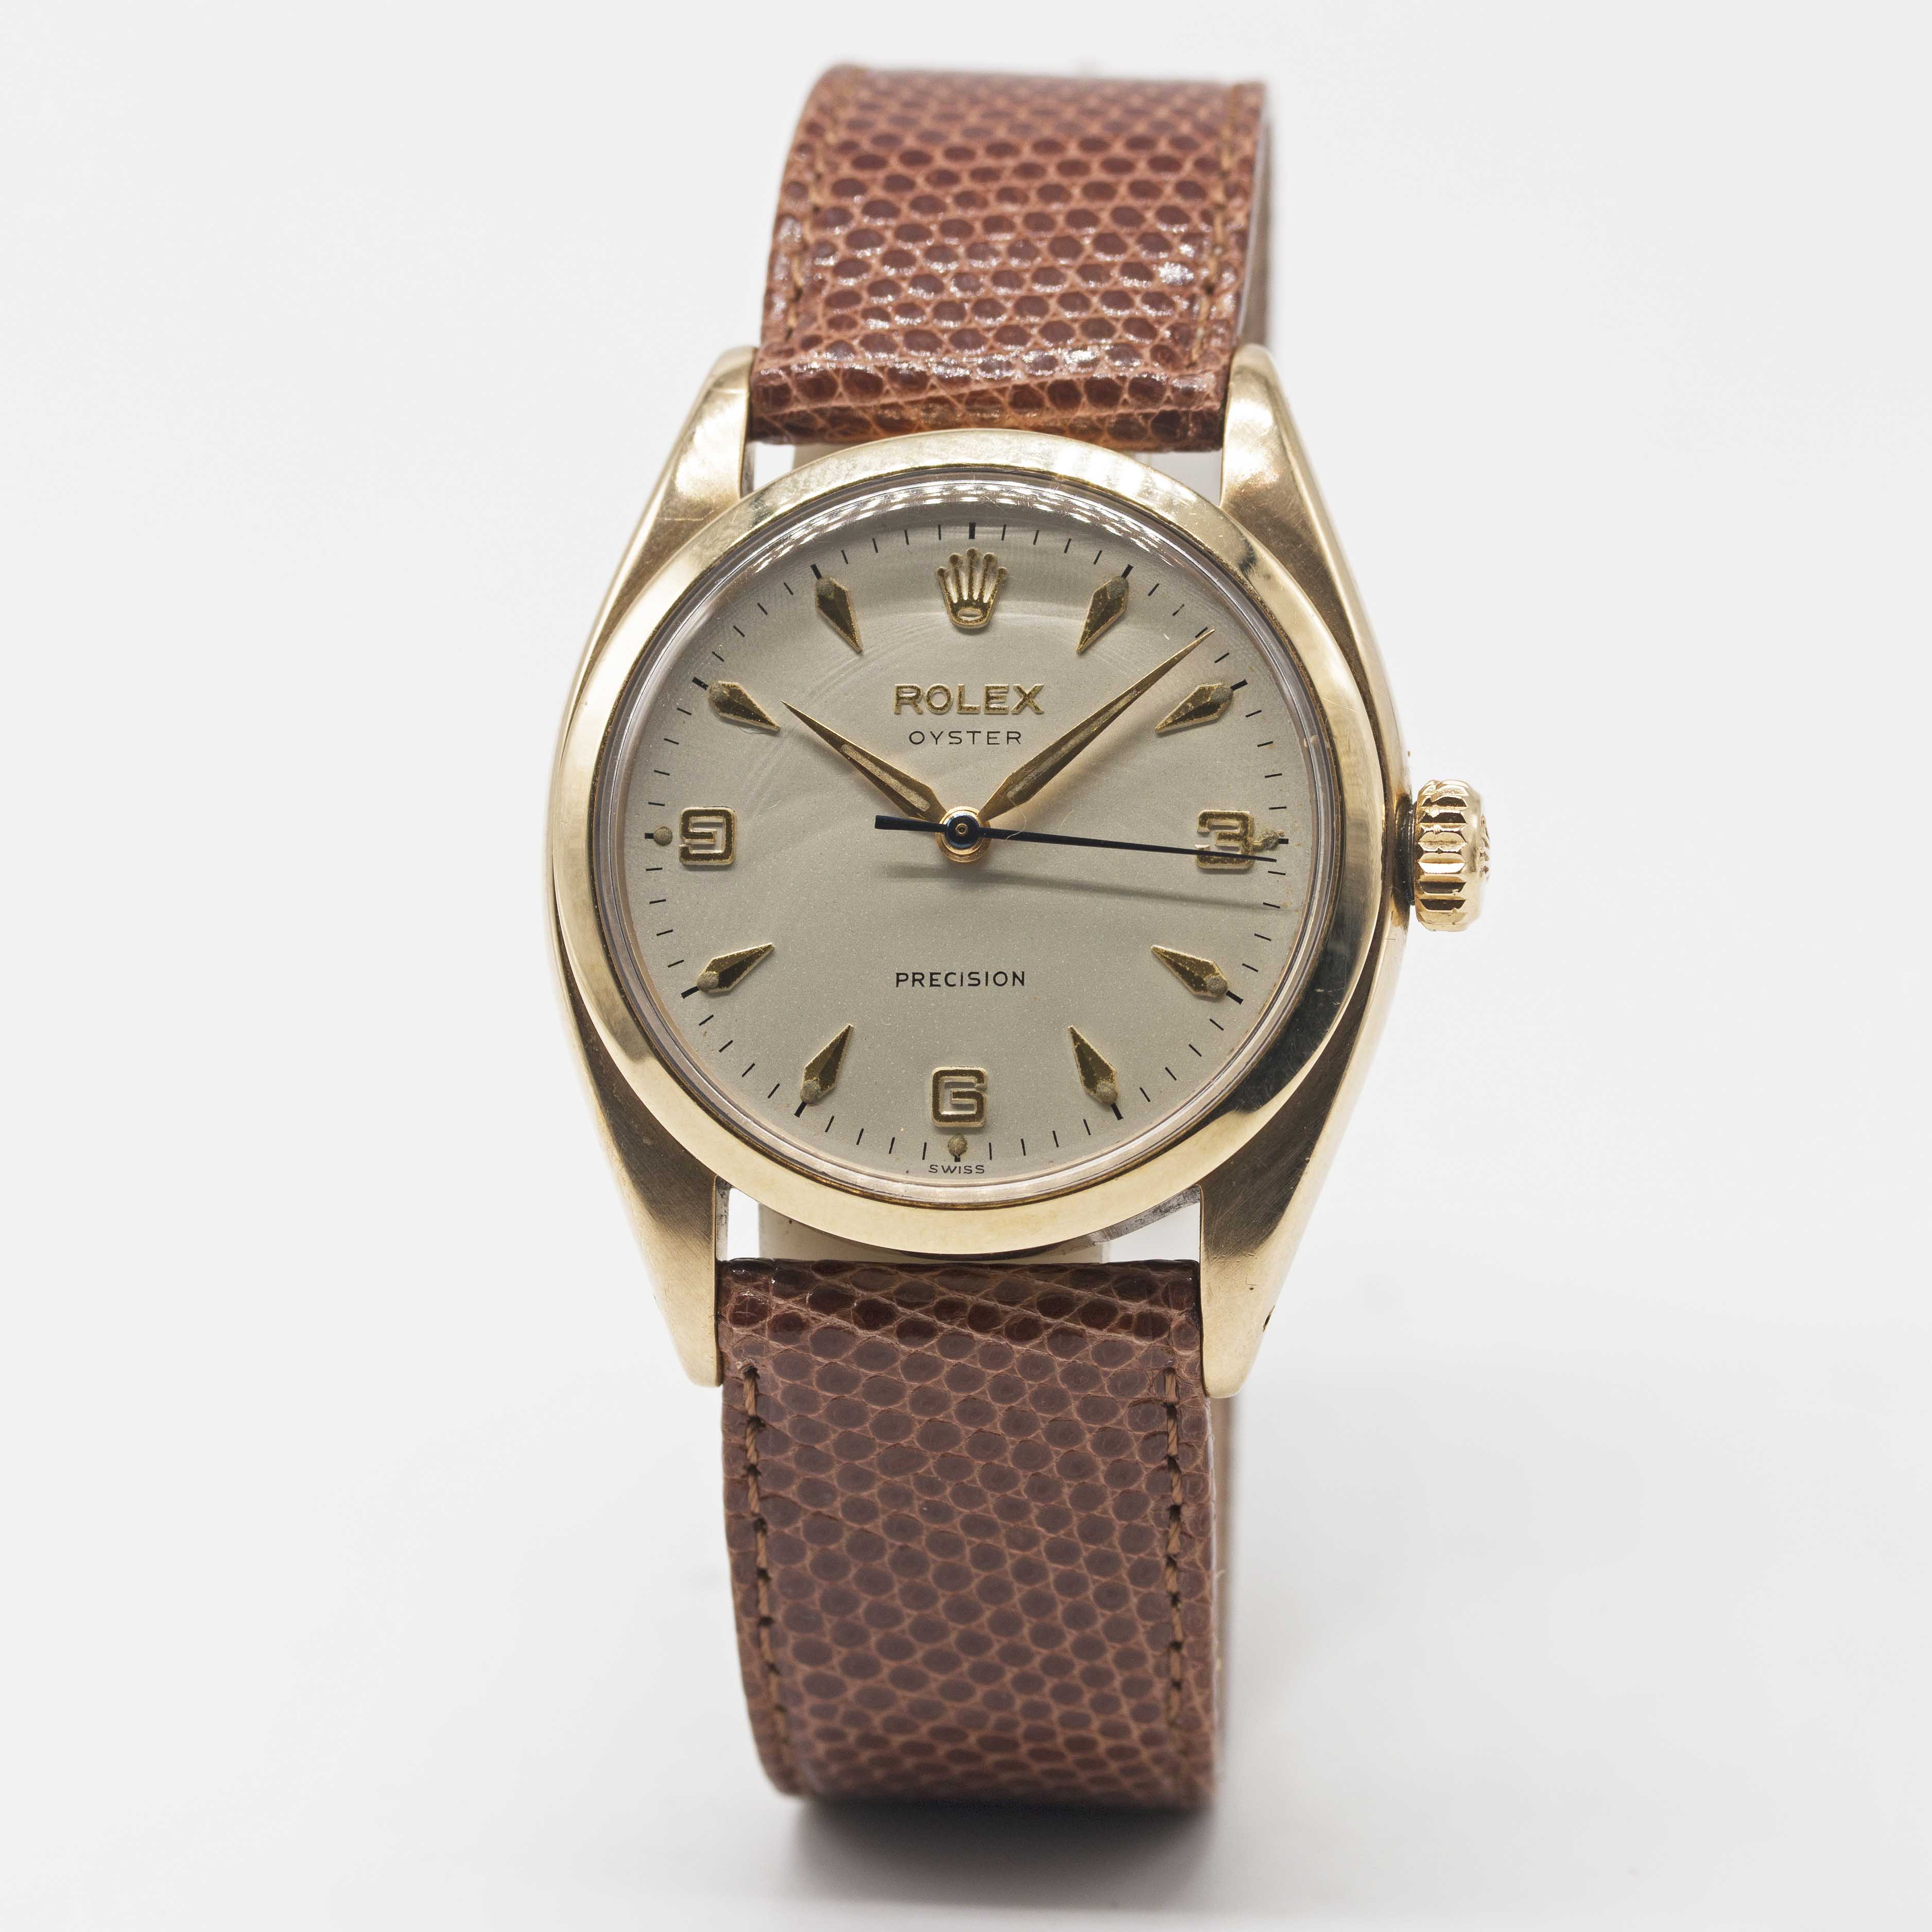 A GENTLEMAN'S 9CT SOLID GOLD ROLEX OYSTER PRECISION WRIST WATCH CIRCA 1959, REF. 6426 WITH 3-6-9 " - Image 2 of 8